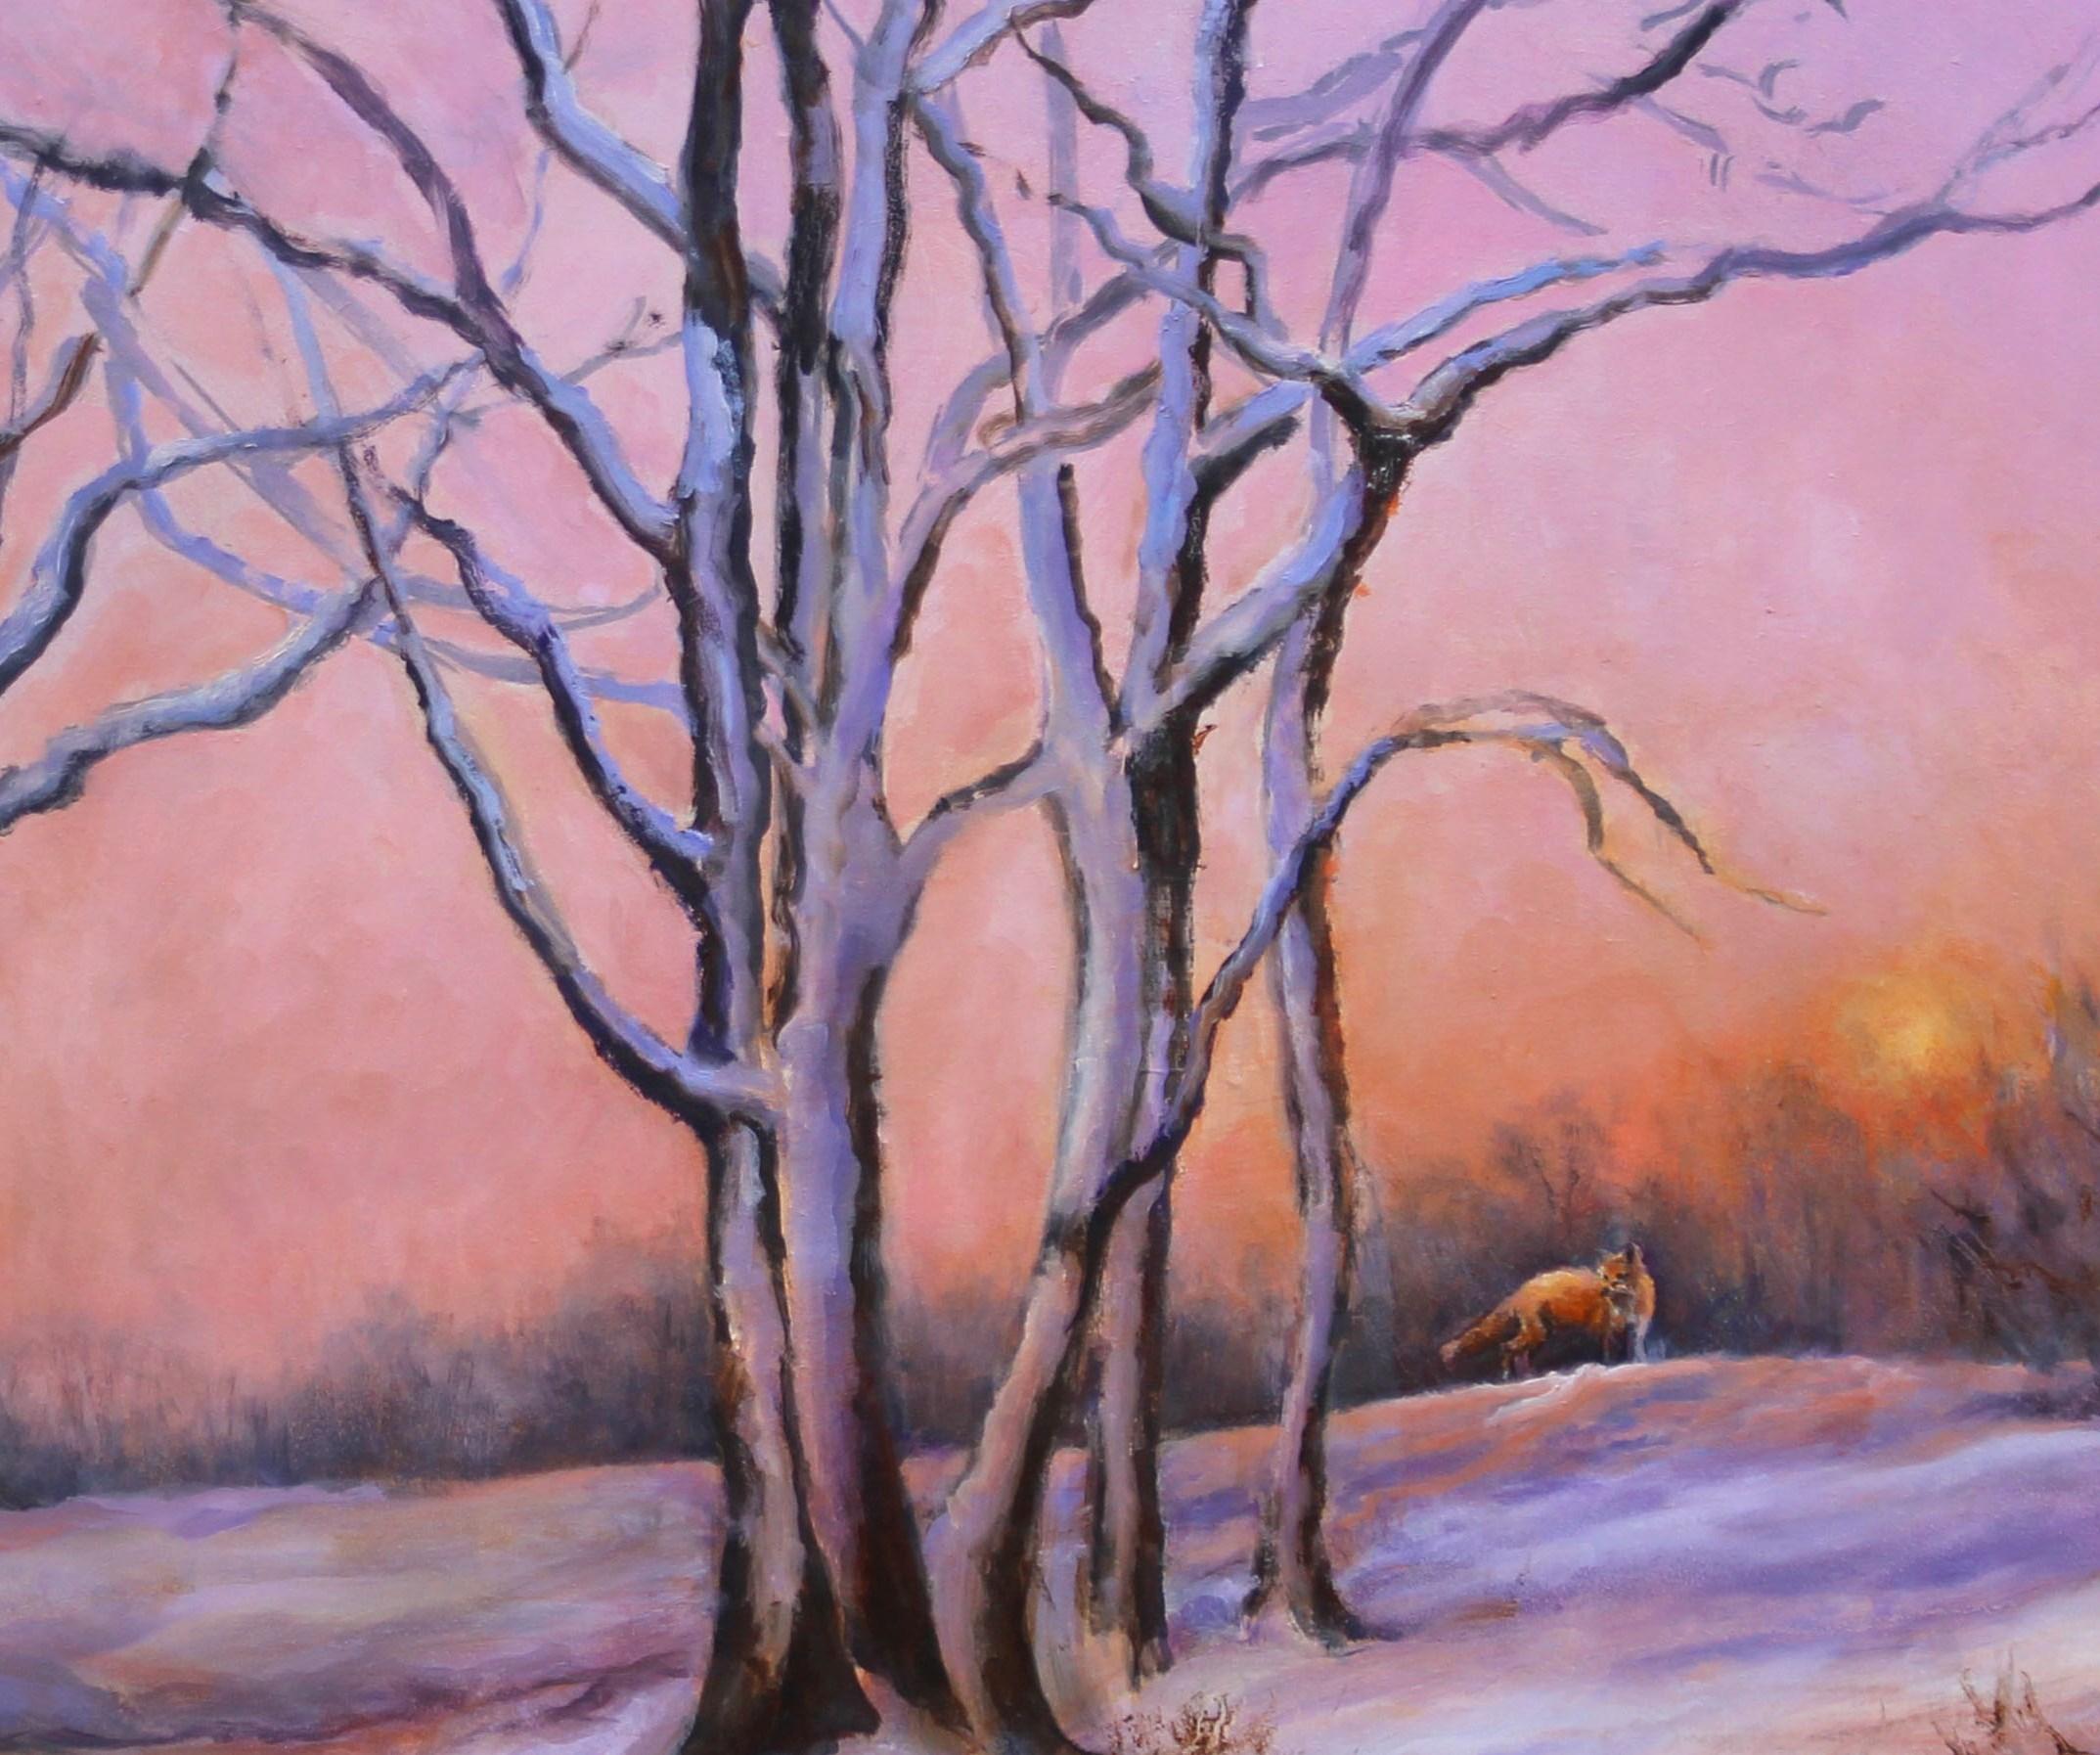 Large Dramatic Colorful Evening Sunset in Chilly Snowy Landscape with Fox  - Romantic Painting by Beth Carlson